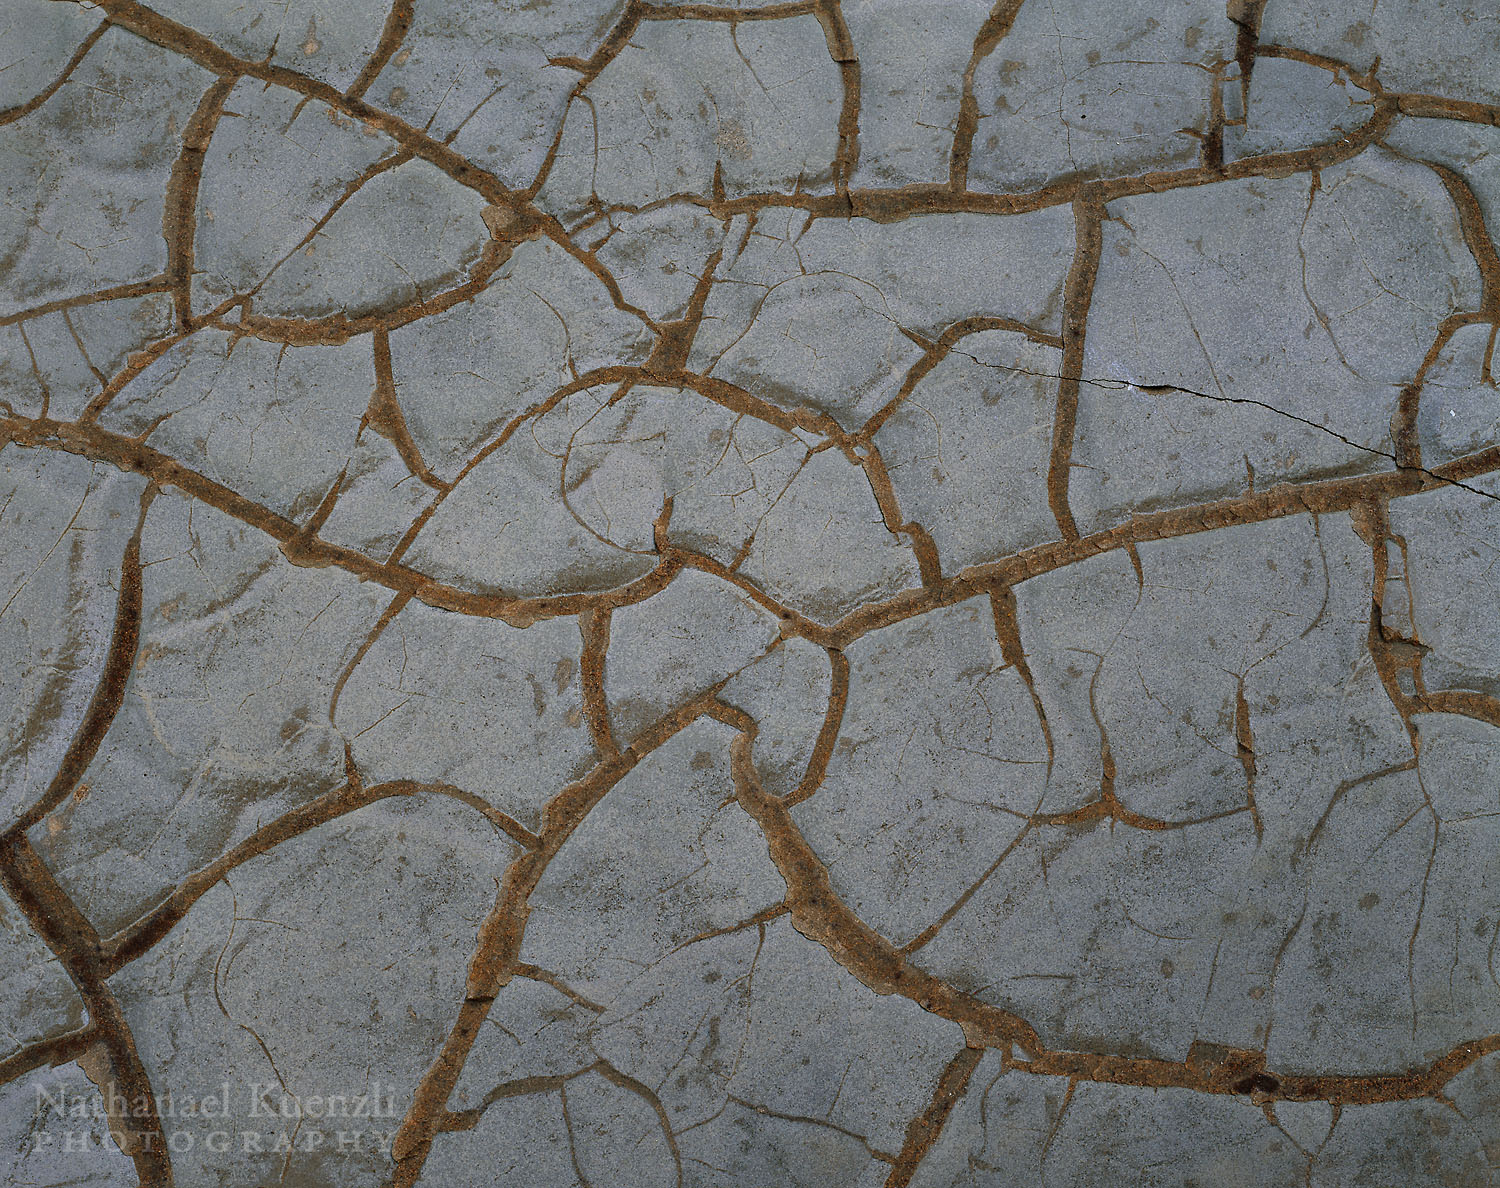   Rock Detail, Porcupine Mountains Wilderness State Park, Michigan, May 2003  